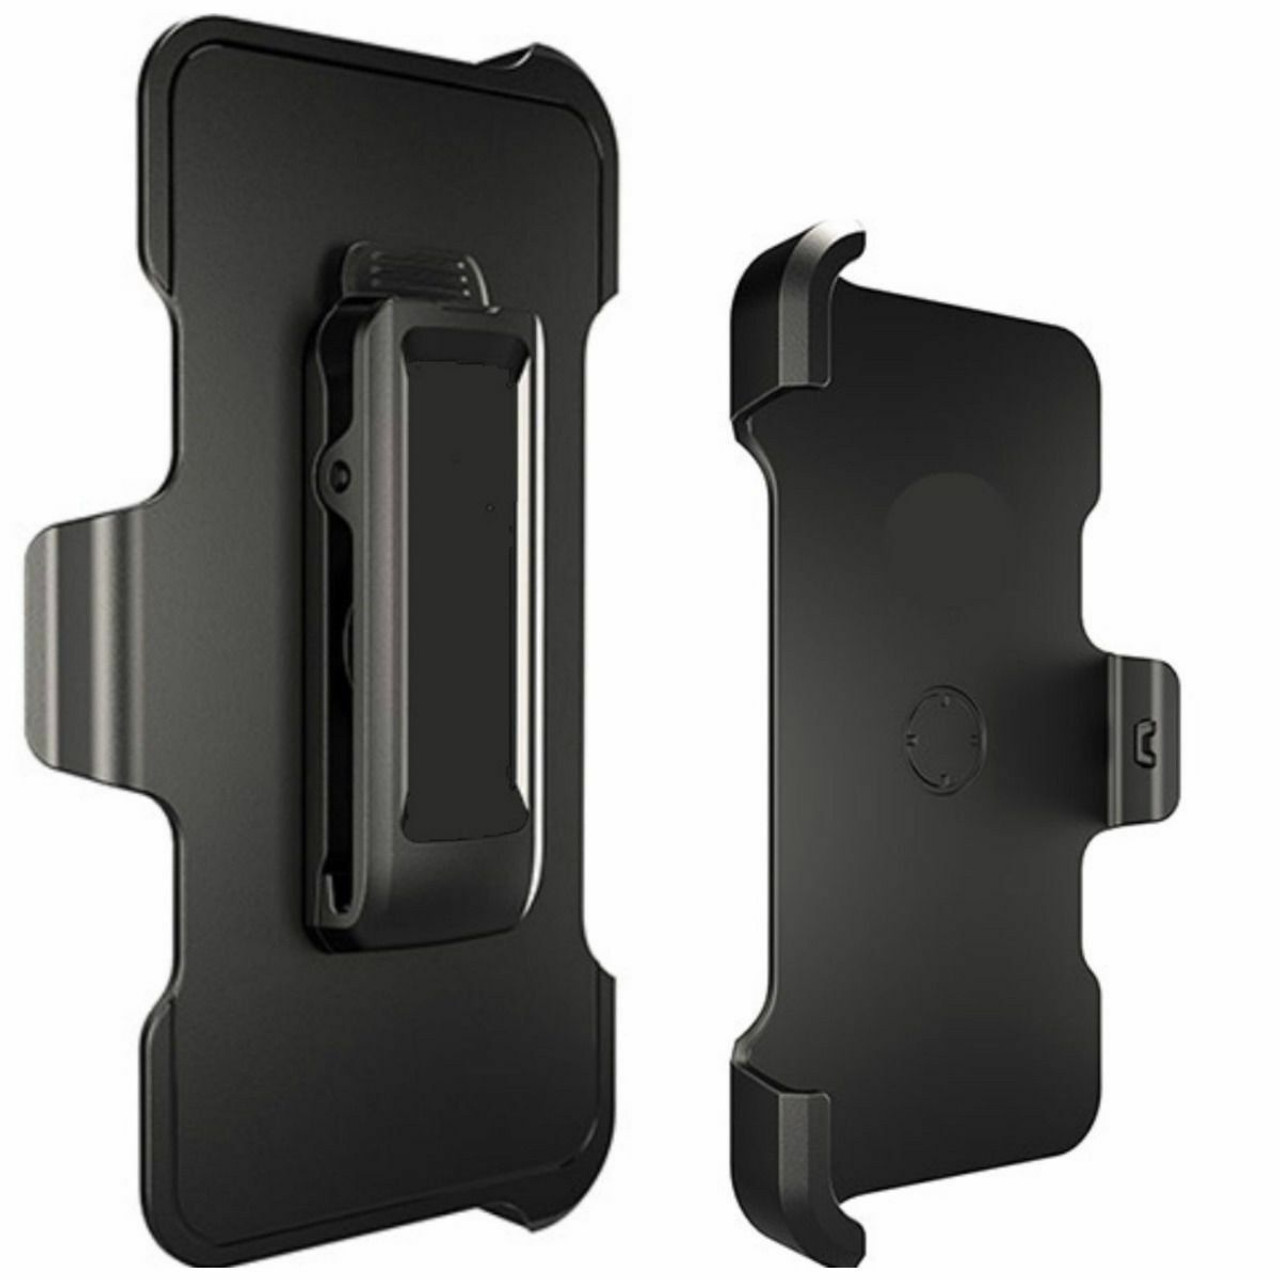 Belt Clip Holster Replacement For OtterBox Defender Case Samsung Galaxy S9 USA